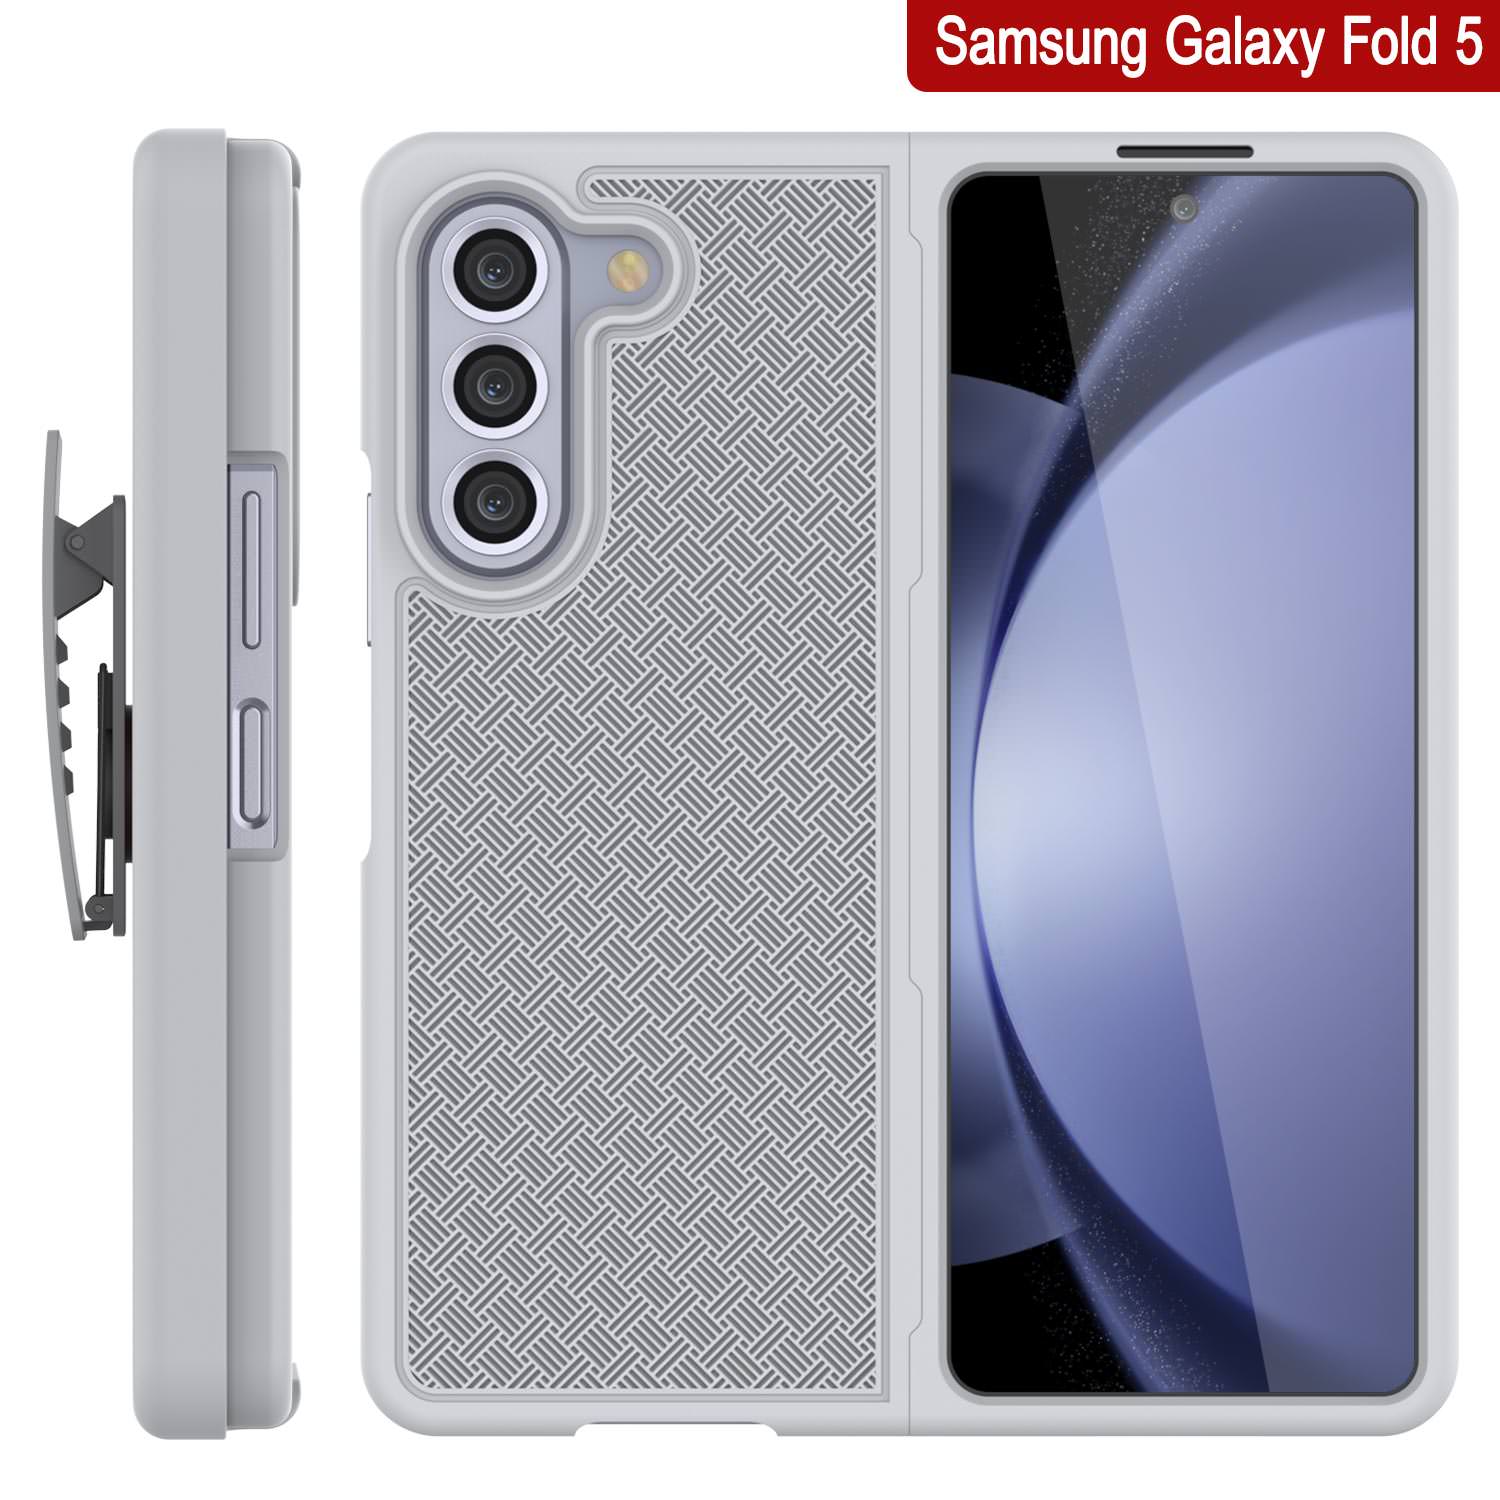 Galaxy Z Fold5 Case With Tempered Glass Screen Protector, Holster Belt Clip & Built-In Kickstand [White]